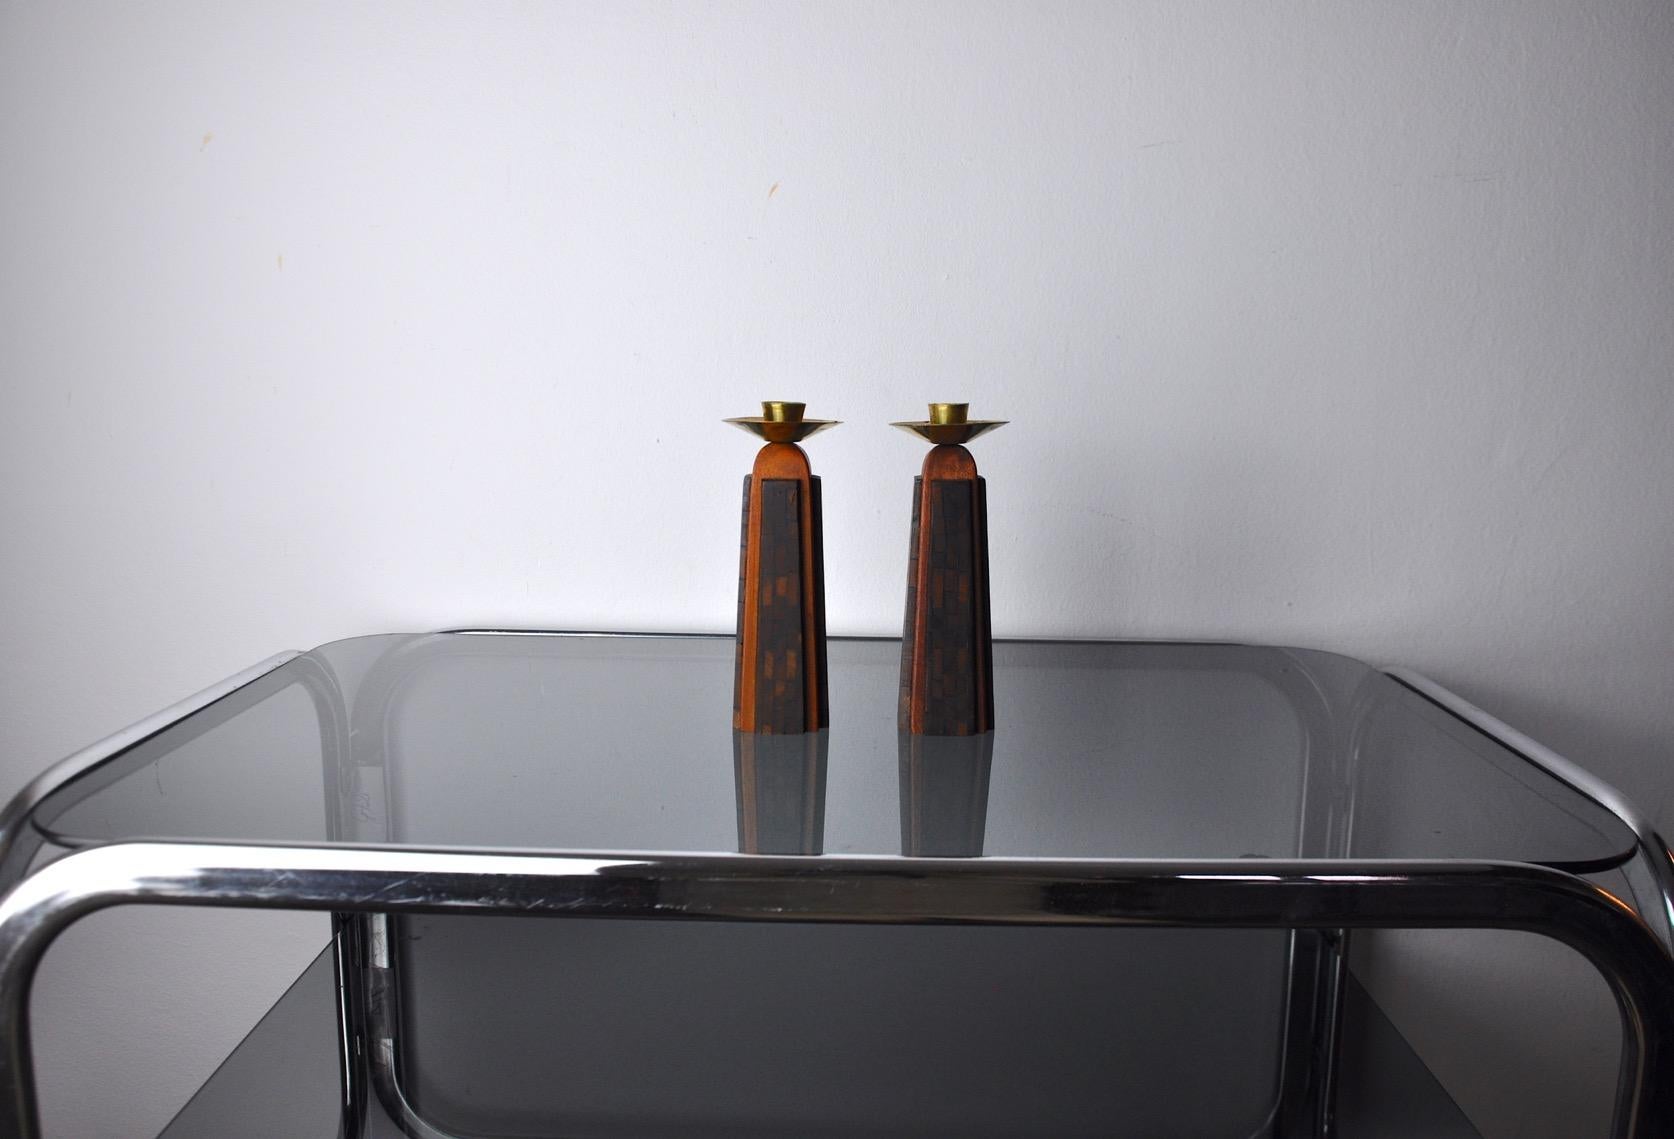 Very beautiful and rare pair of candlesticks designed and produced in Jerusalem in the 1960s. These two candlesticks consist of a beautifully hand-crafted olive wood structure and a brass upper part. Rare design object that will decorate your